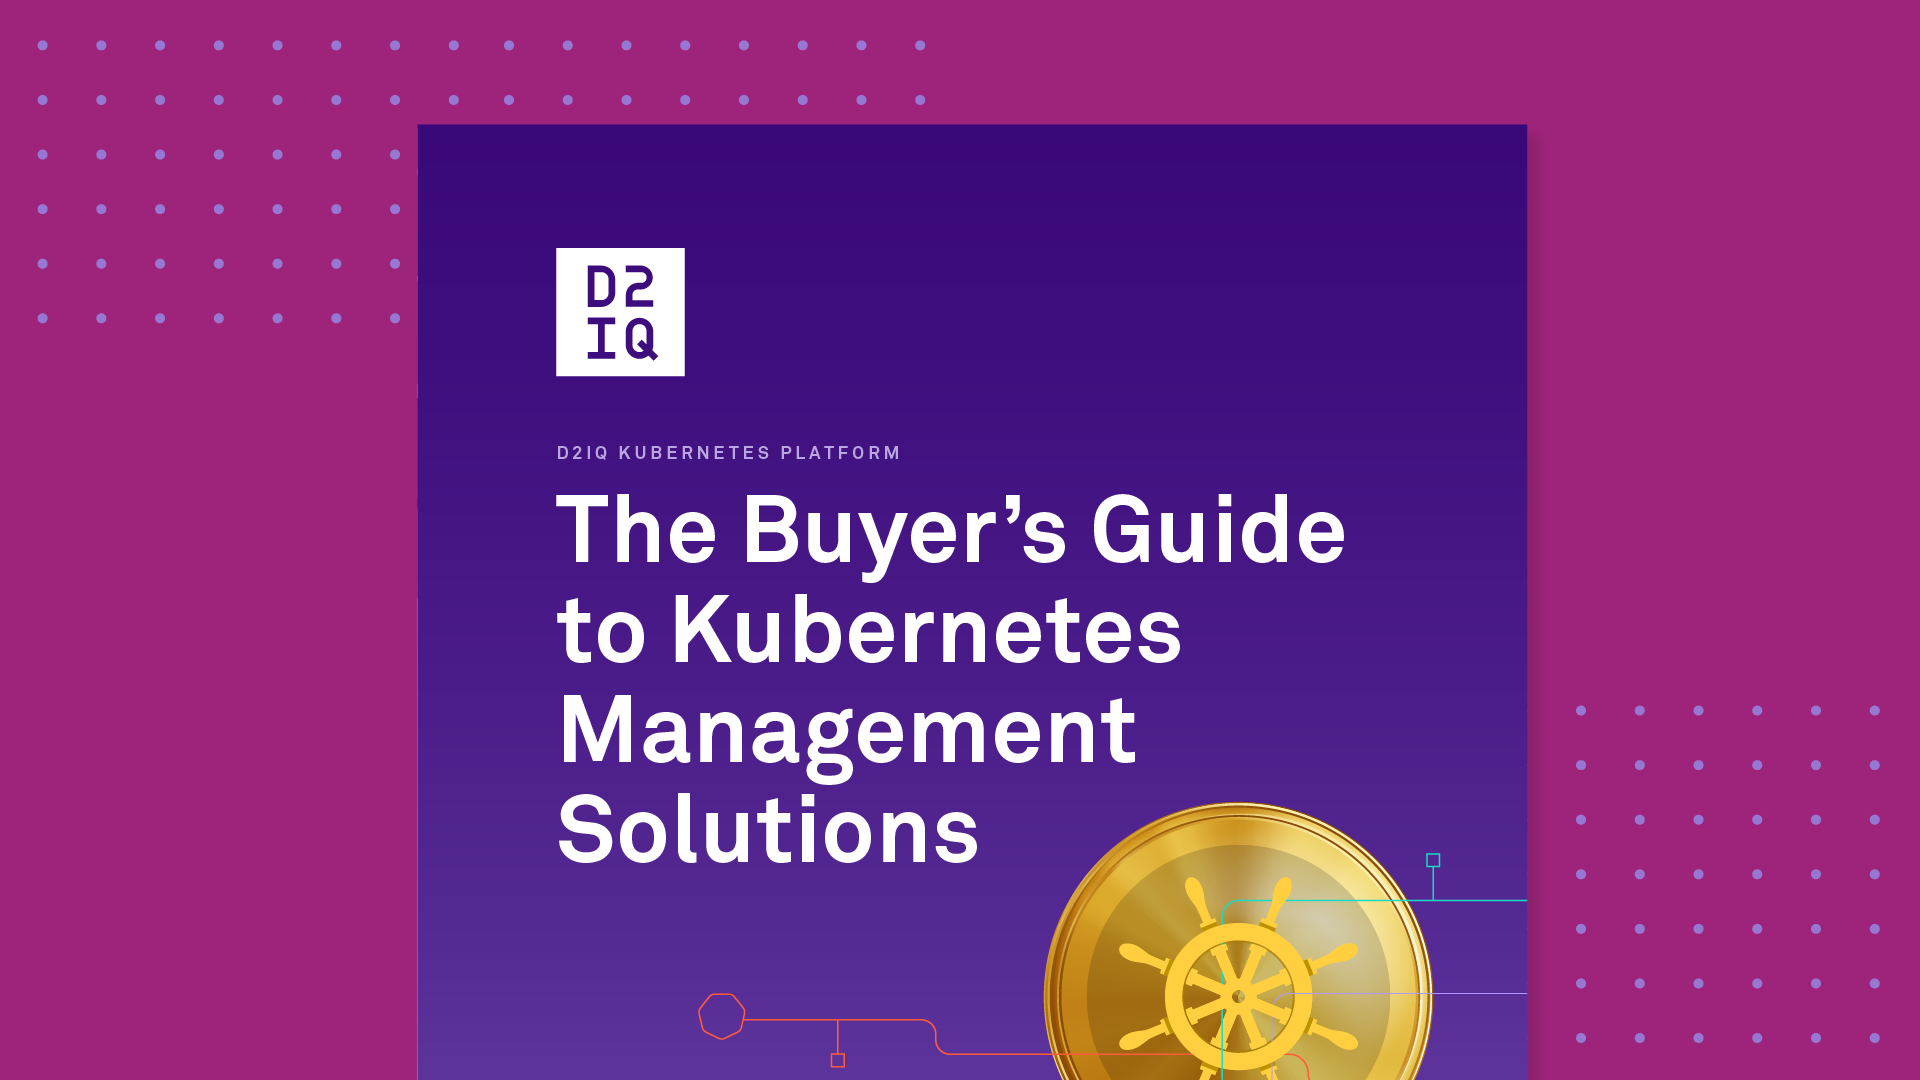 The Buyer’s Guide to Kubernetes Management Solutions